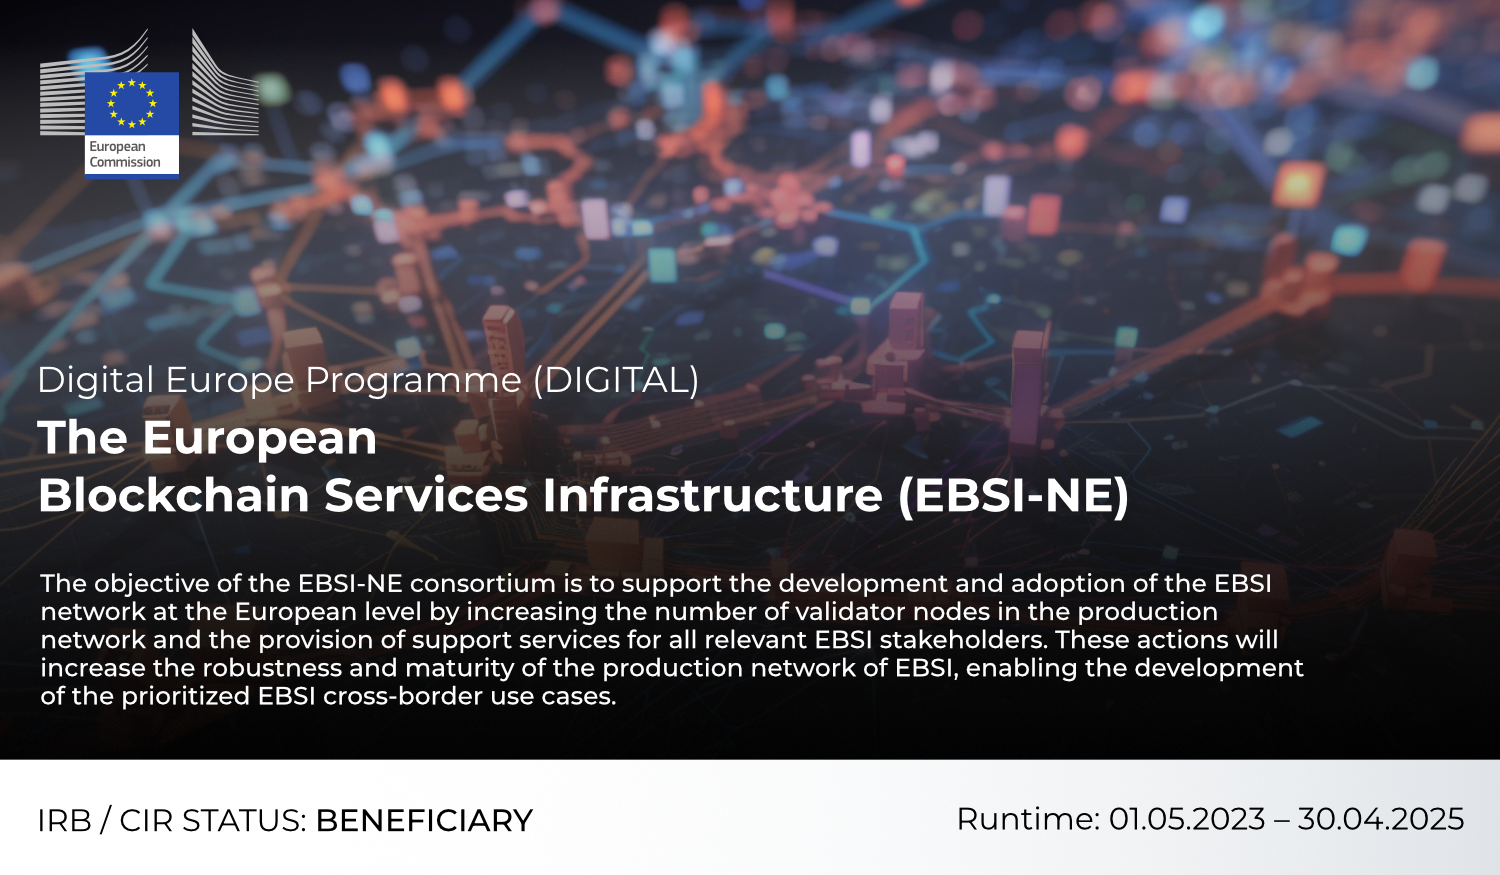 CIR is supporting the development and adoption of the EBSI network at the European level through the project "The European Blockchain Services Infrastructure (EBSI-NE)""